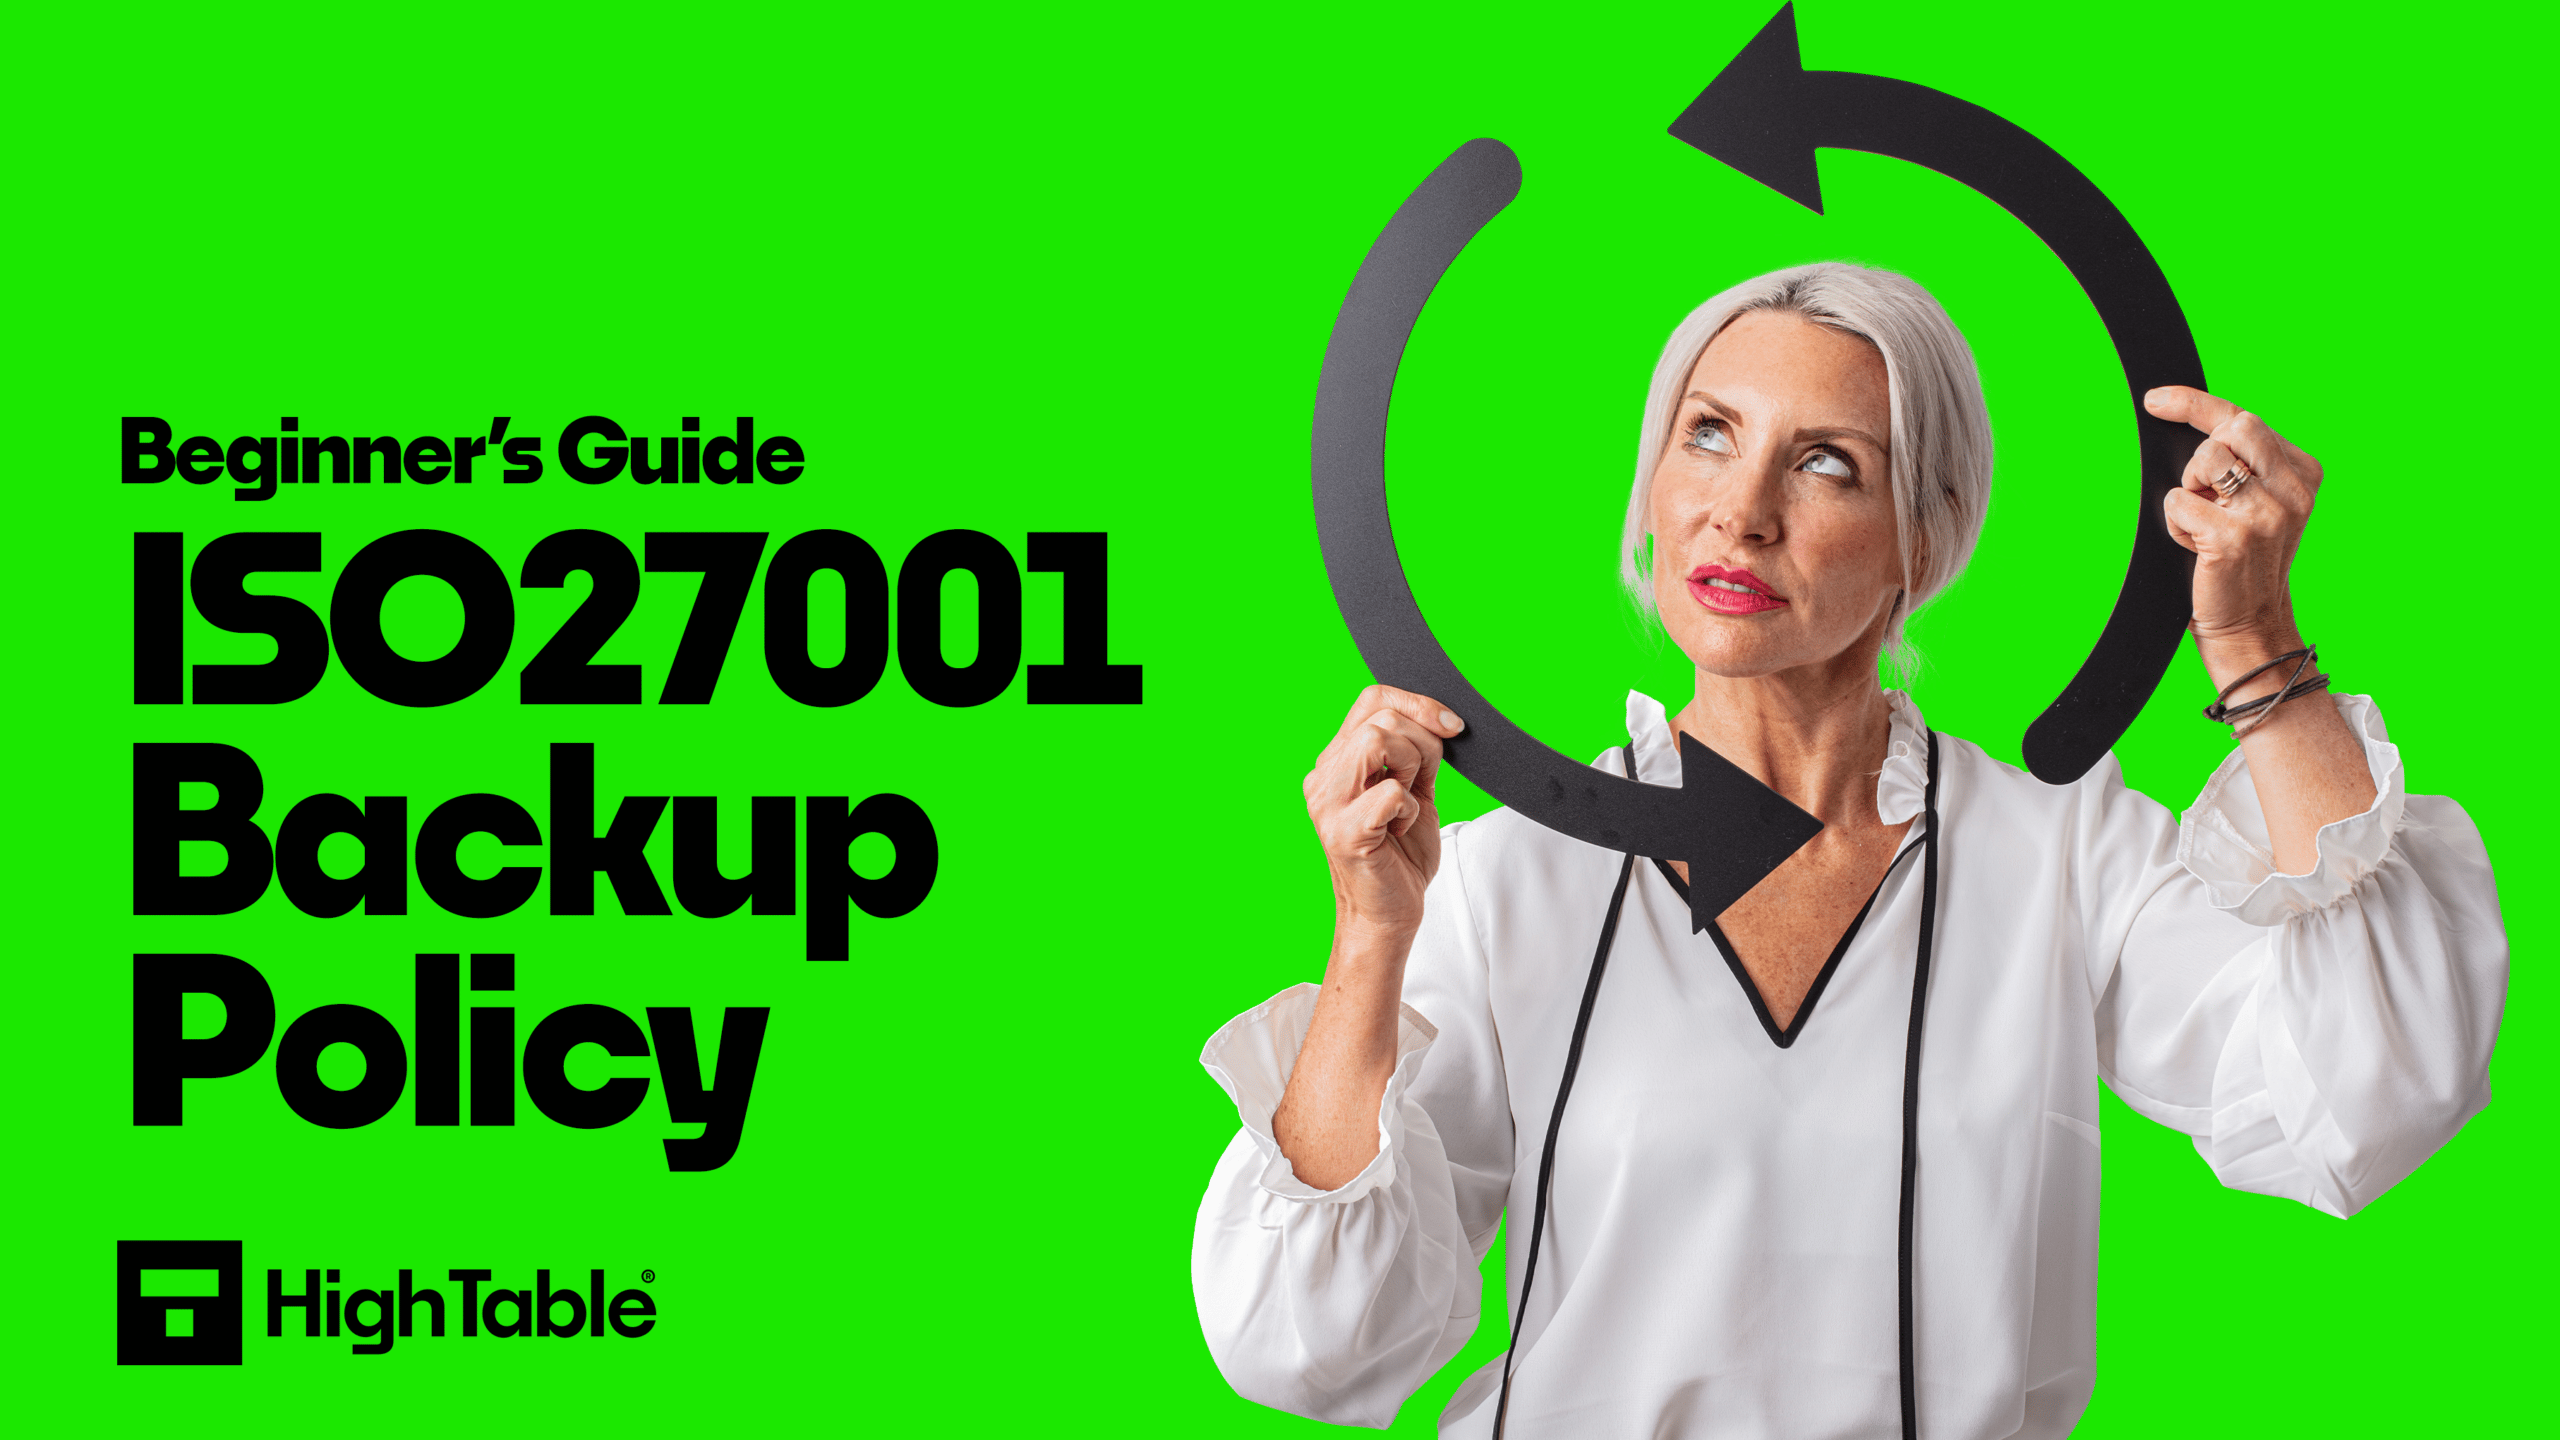 ISO 27001 Backup Policy Beginner's Guide